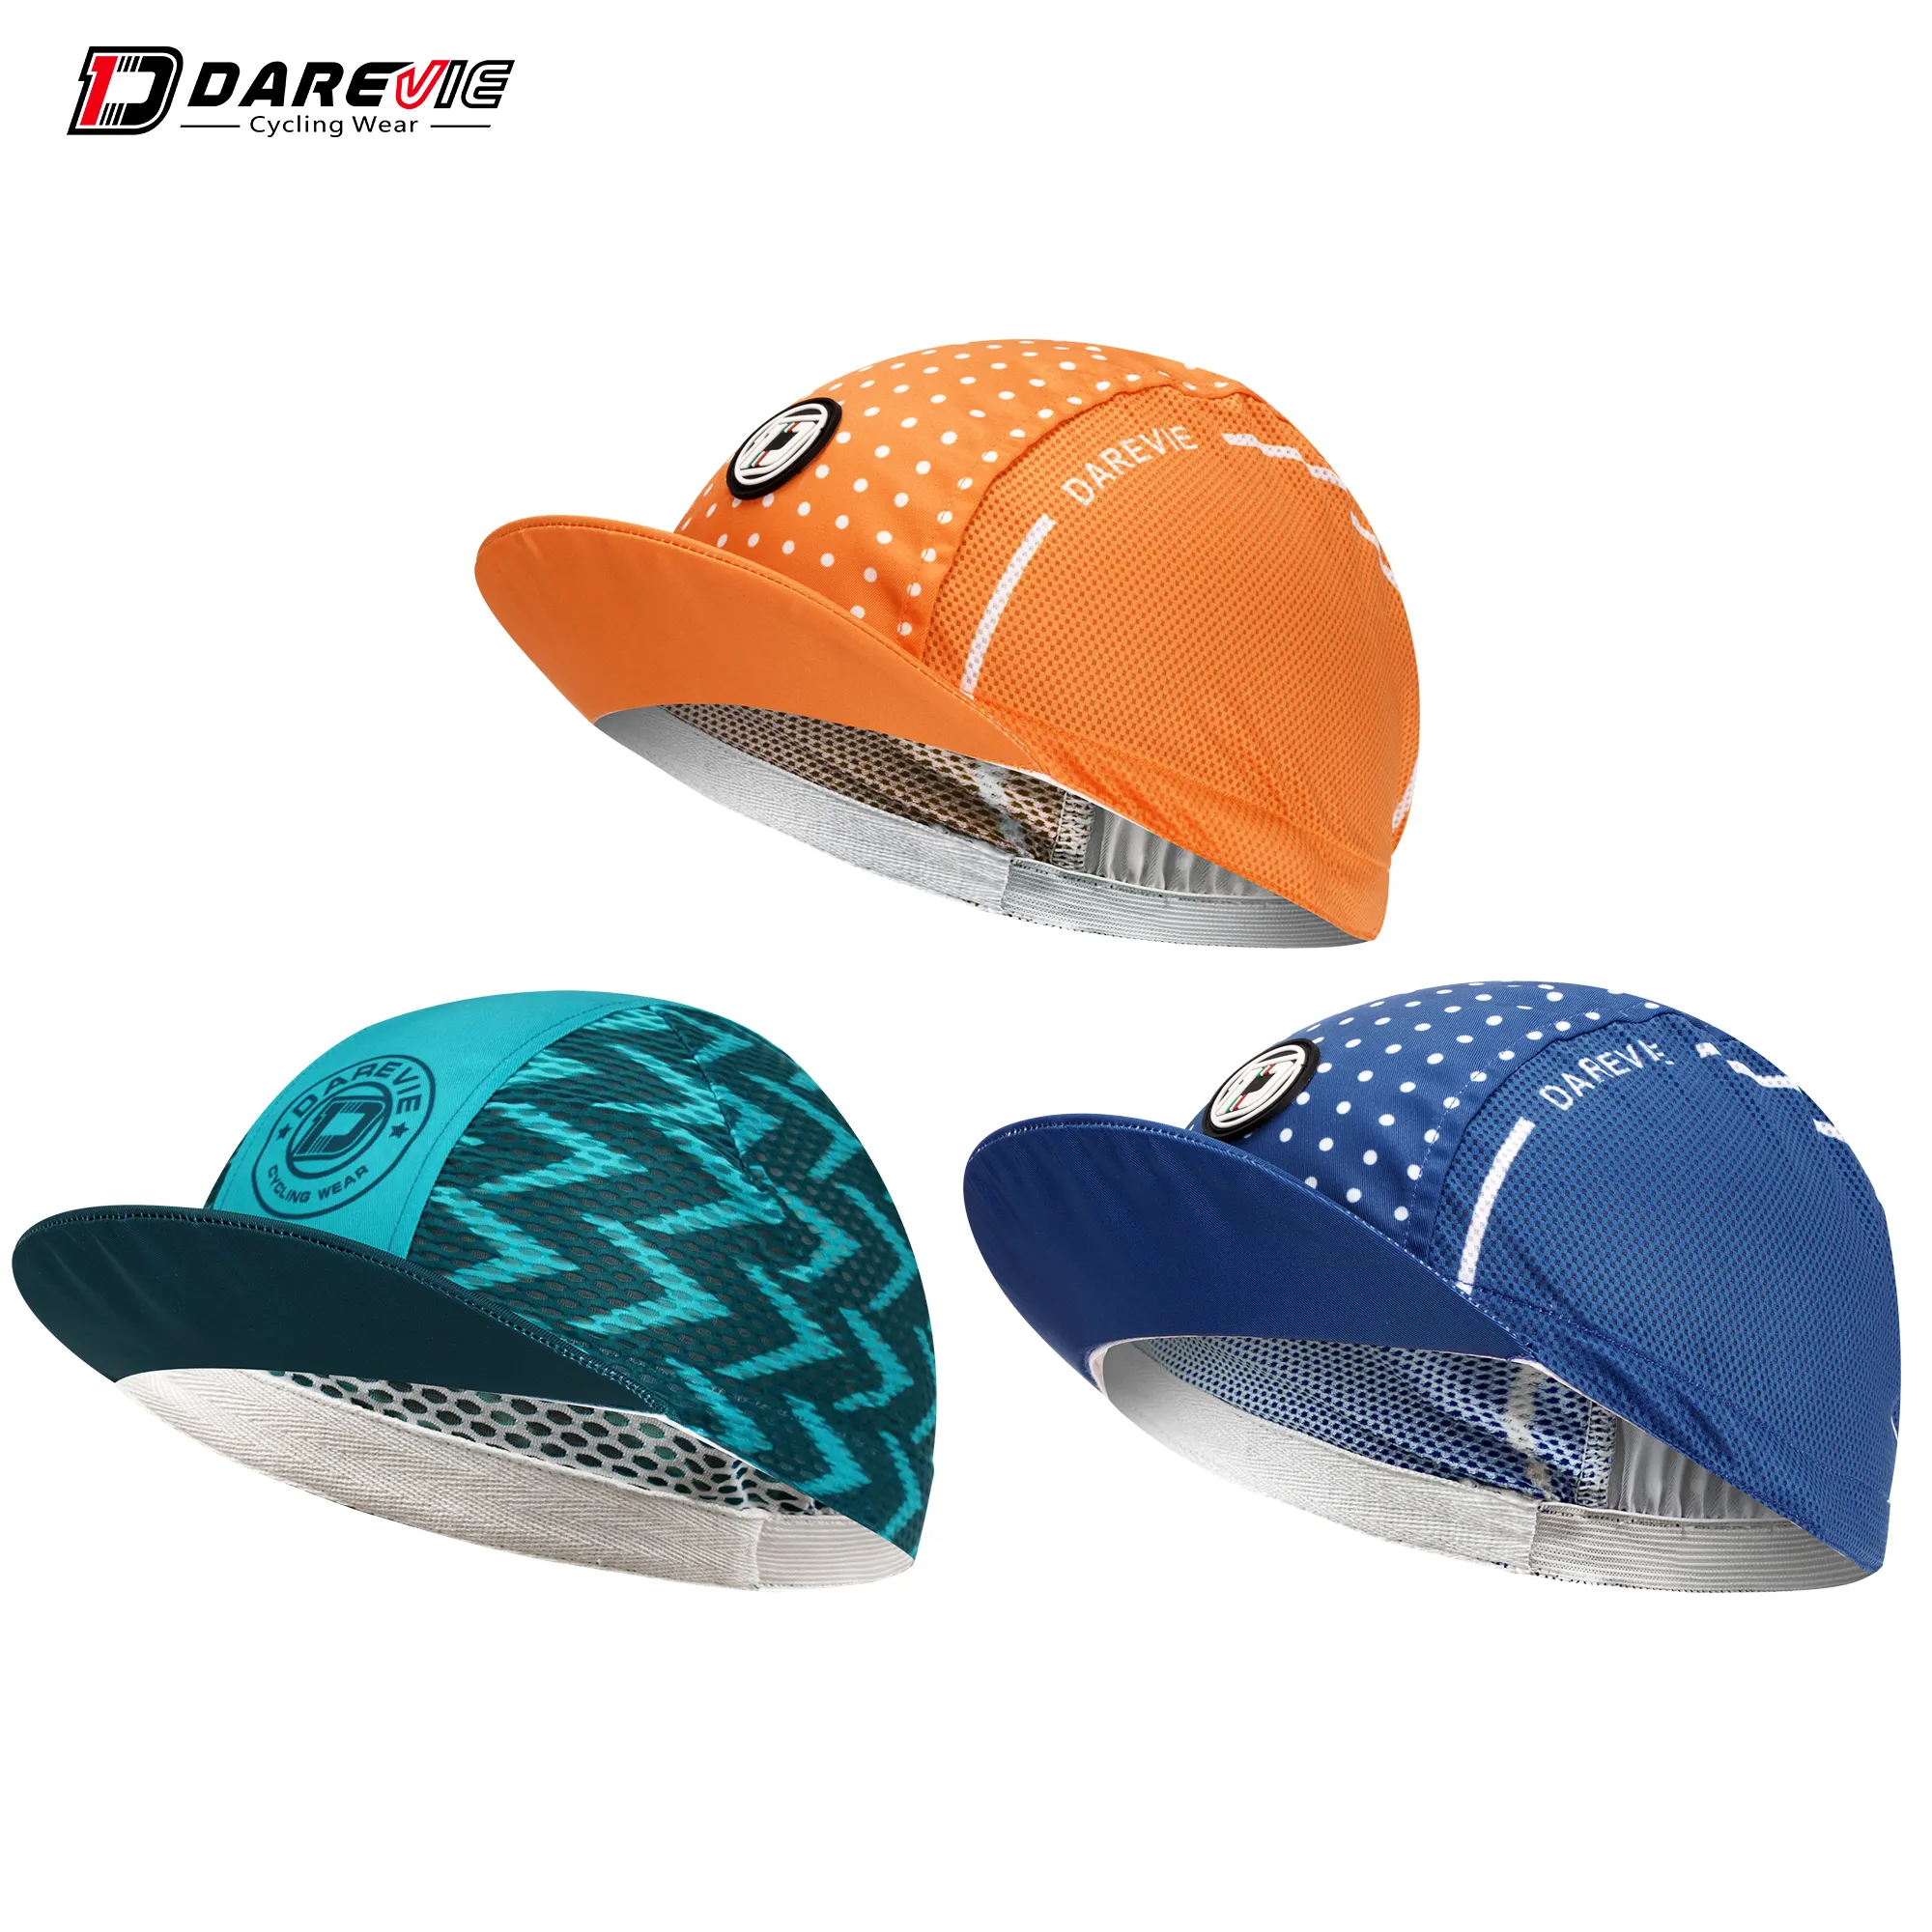 Darevie professional custom cycling caps with one size fits all for the outdoor sports keep moving cycling accessories